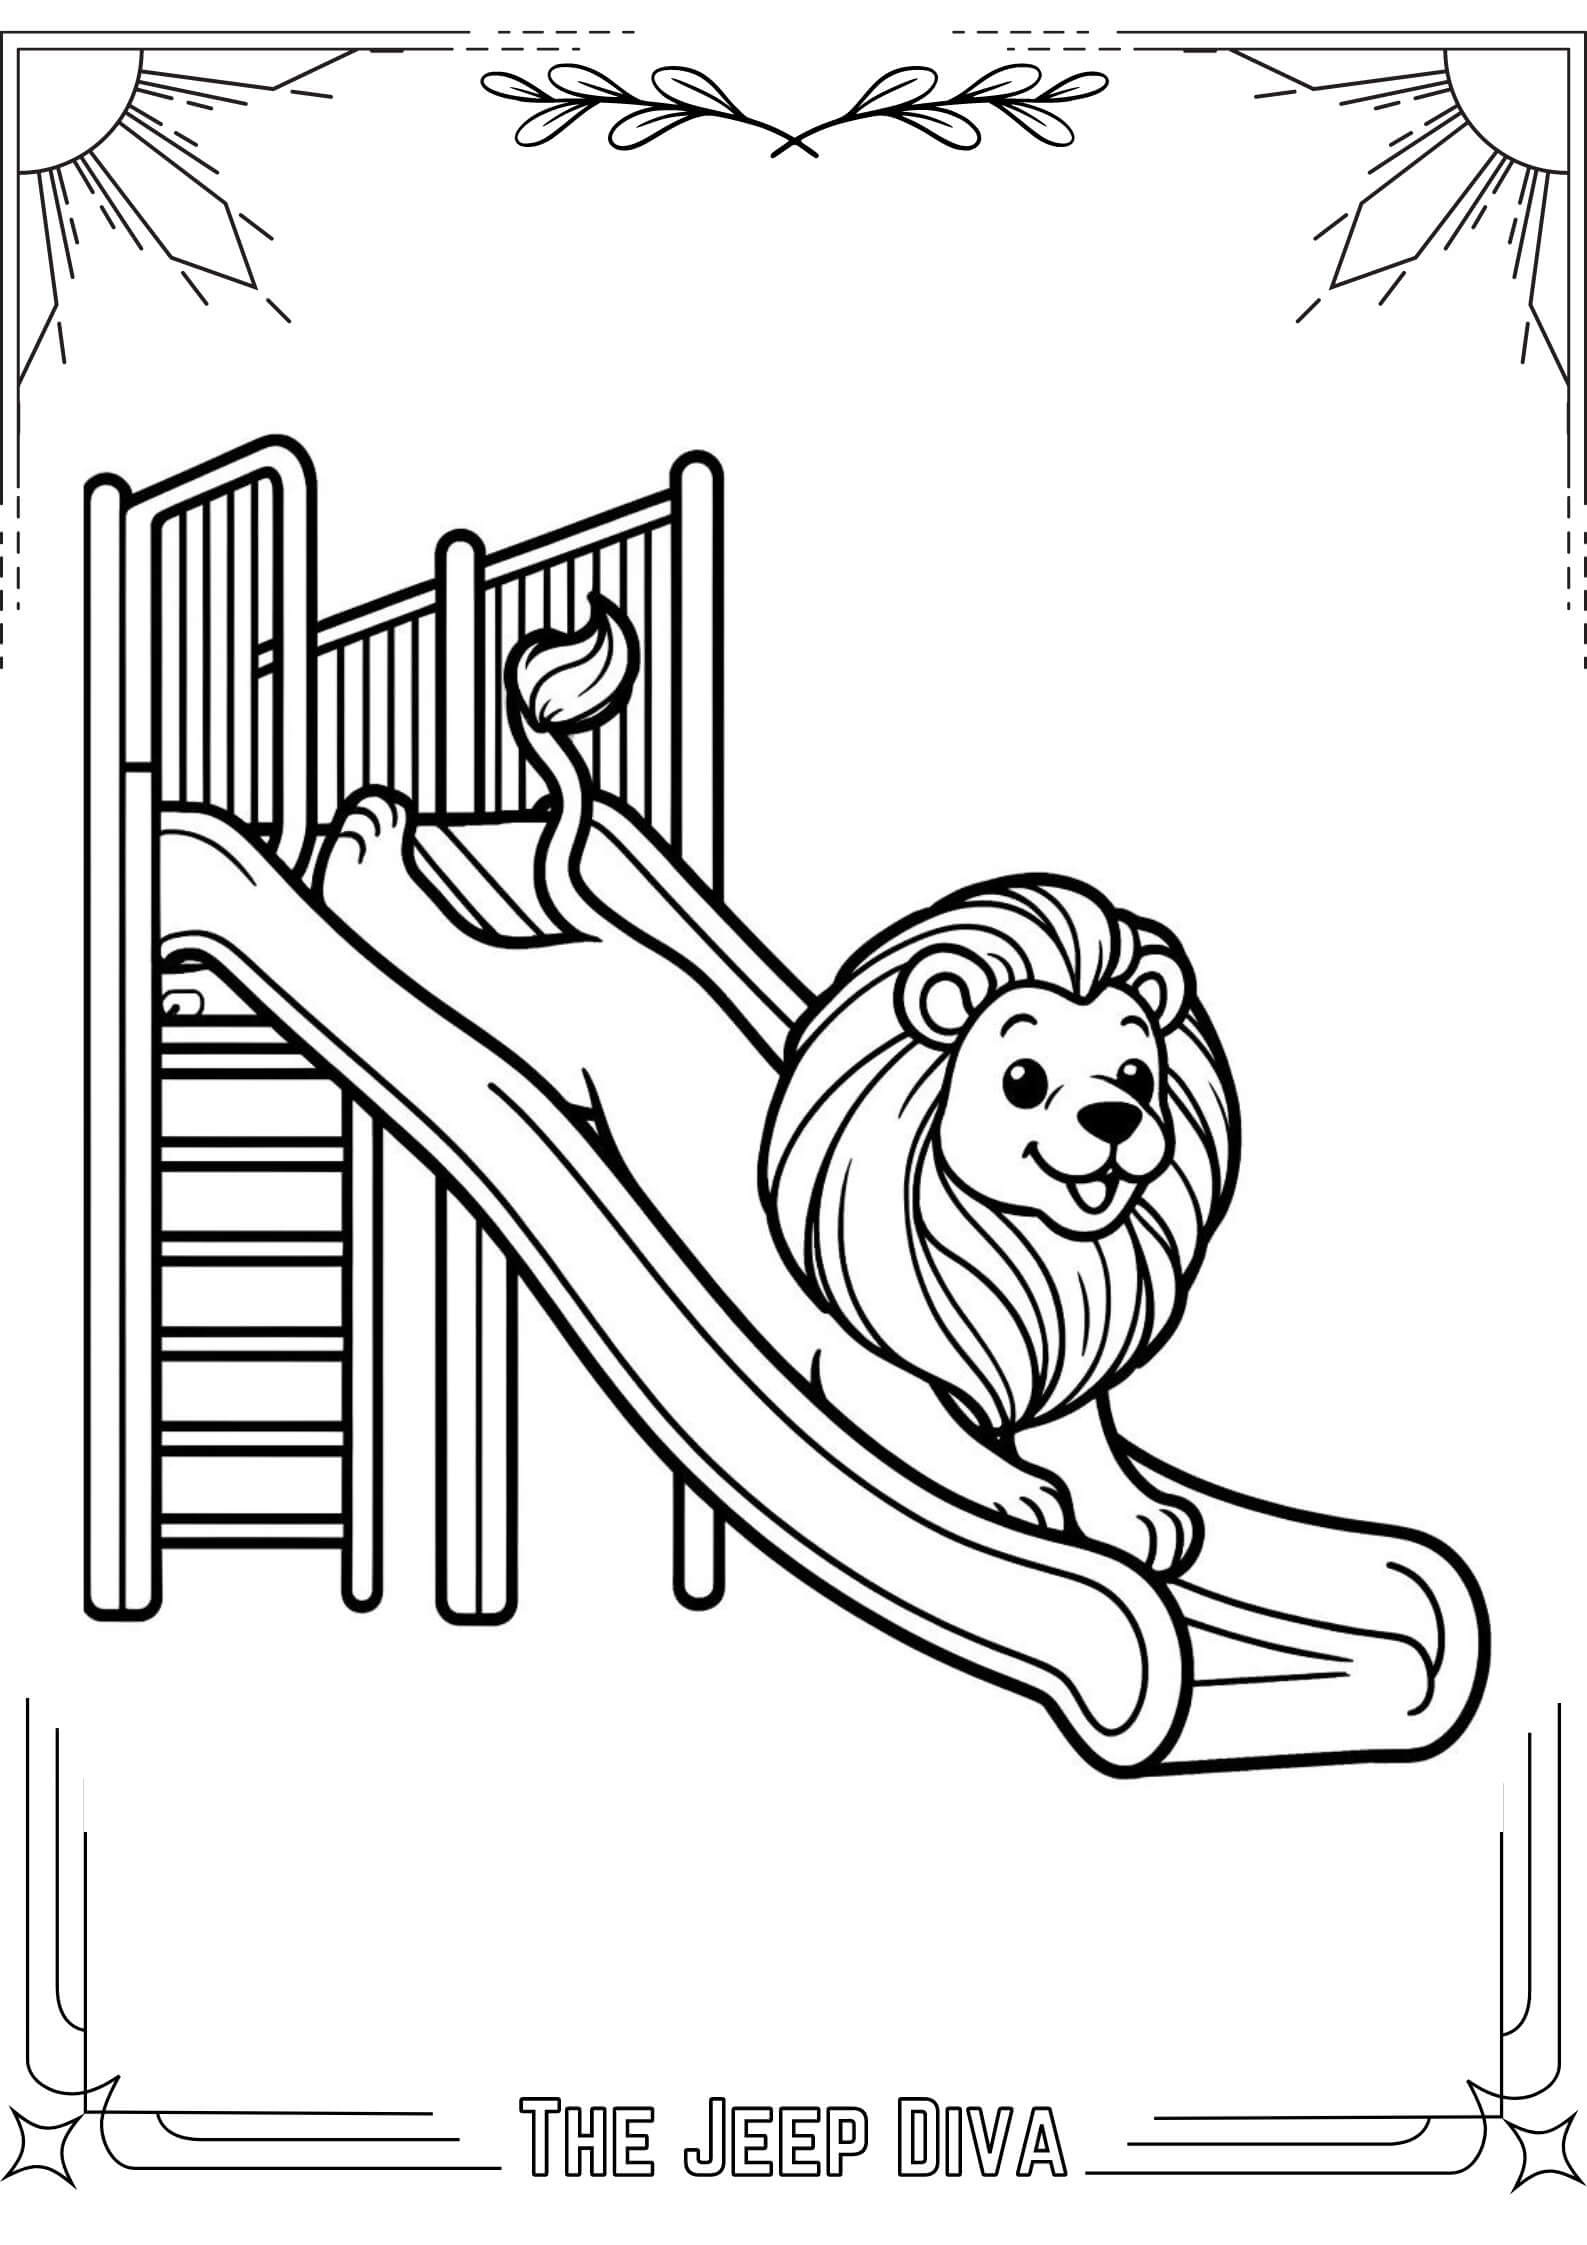 The Jeep Diva Coloring Page Lion Medium Difficulty 17